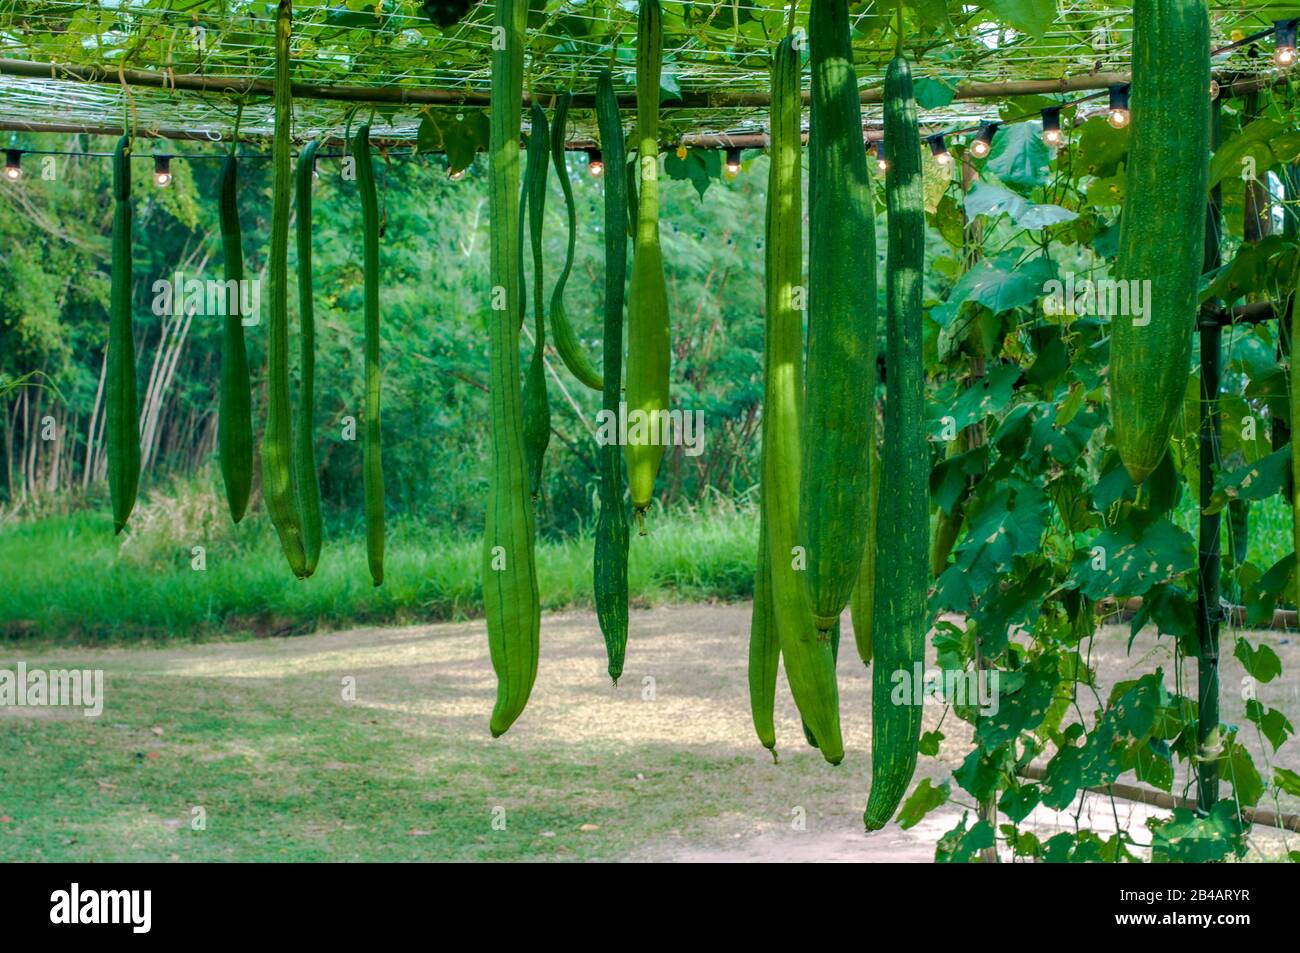 Luffa cylindrica (Sponge gourd, Smooth loofah, Vegetable sponge, Gourd towel) ; A colorful of fruit which round & long shape. Yellow flower & green le Stock Photo